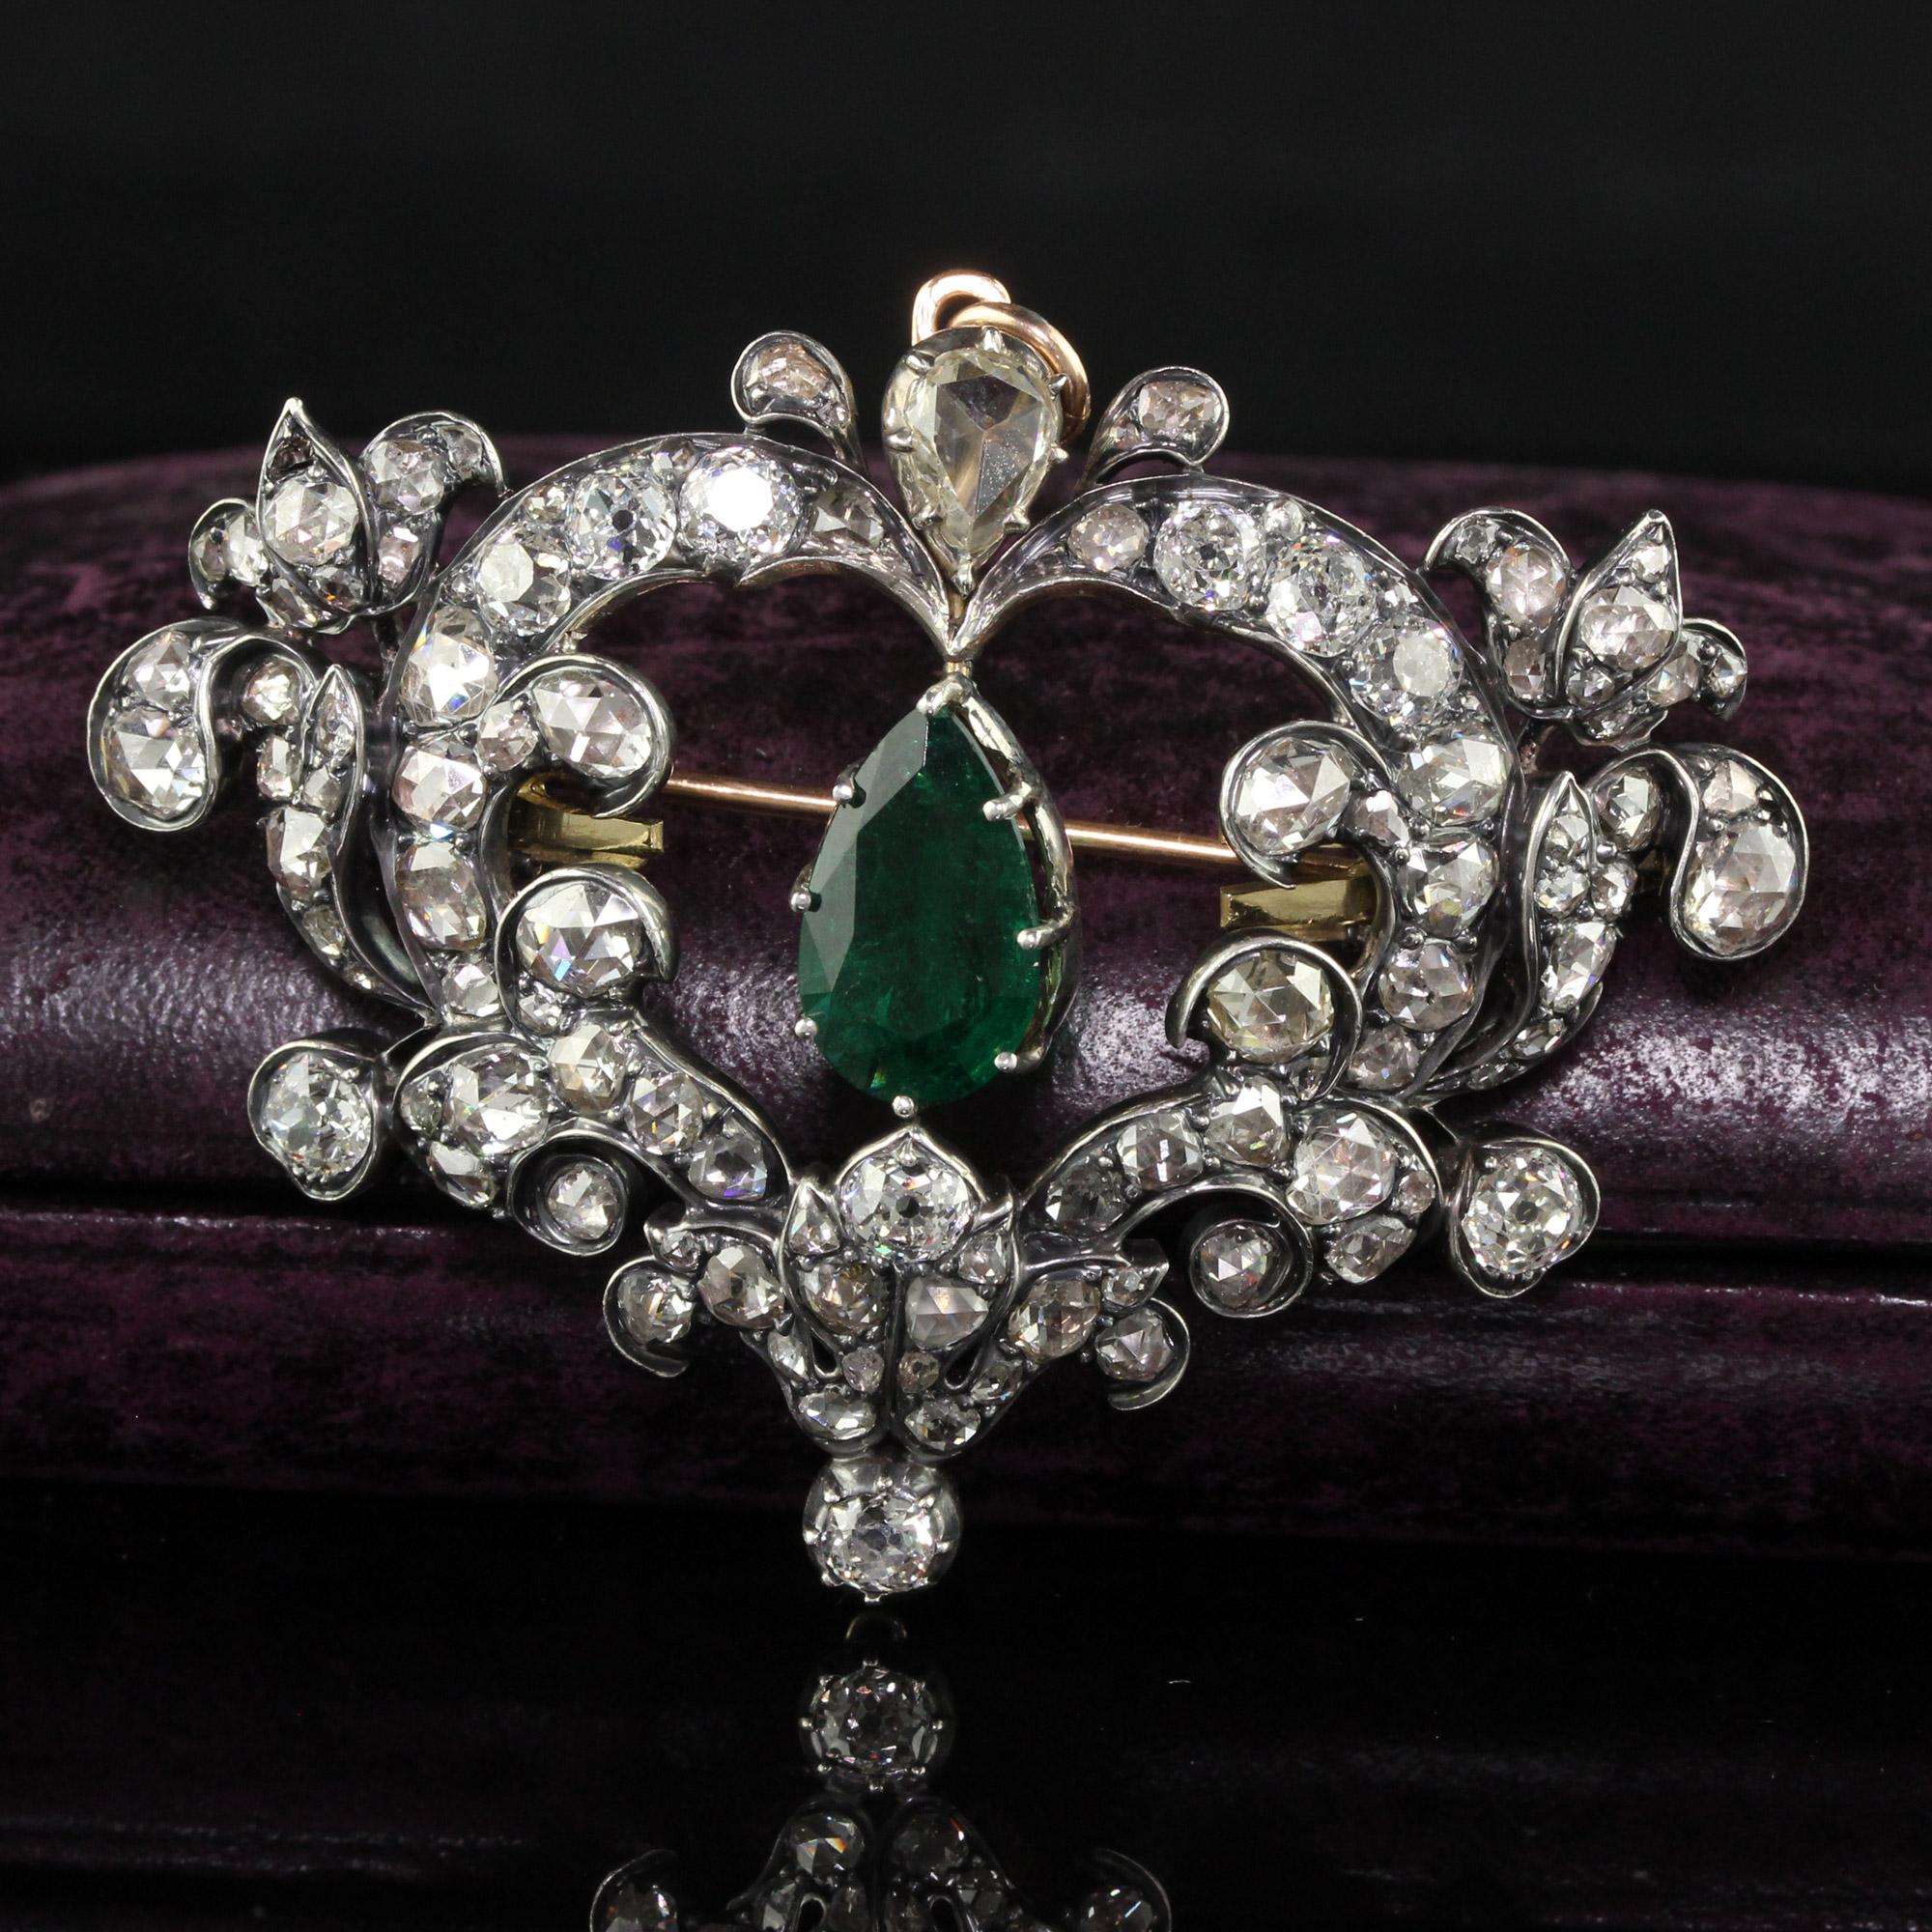 Beautiful Antique Victorian 18K Yellow Gold Silver Top Emerald and Diamond Pin Pendant. This stunning antique Victorian pin and pendant is crafted in 18k yellow gold and silver. The center holds a natural deep green pear shape emerald and has rose